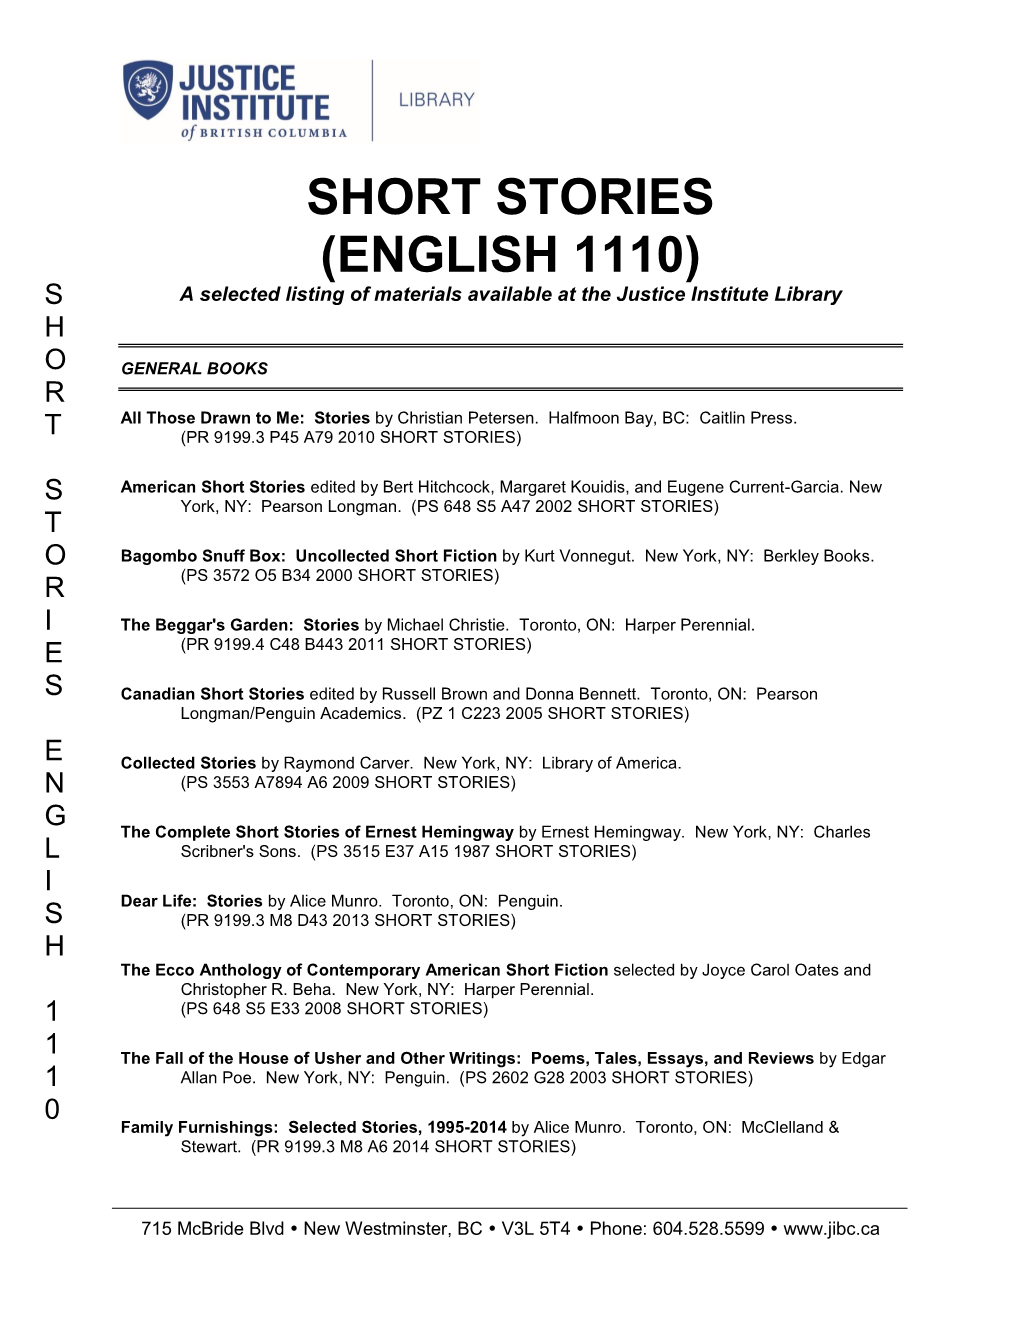 SHORT STORIES (ENGLISH 1110) S a Selected Listing of Materials Available at the Justice Institute Library